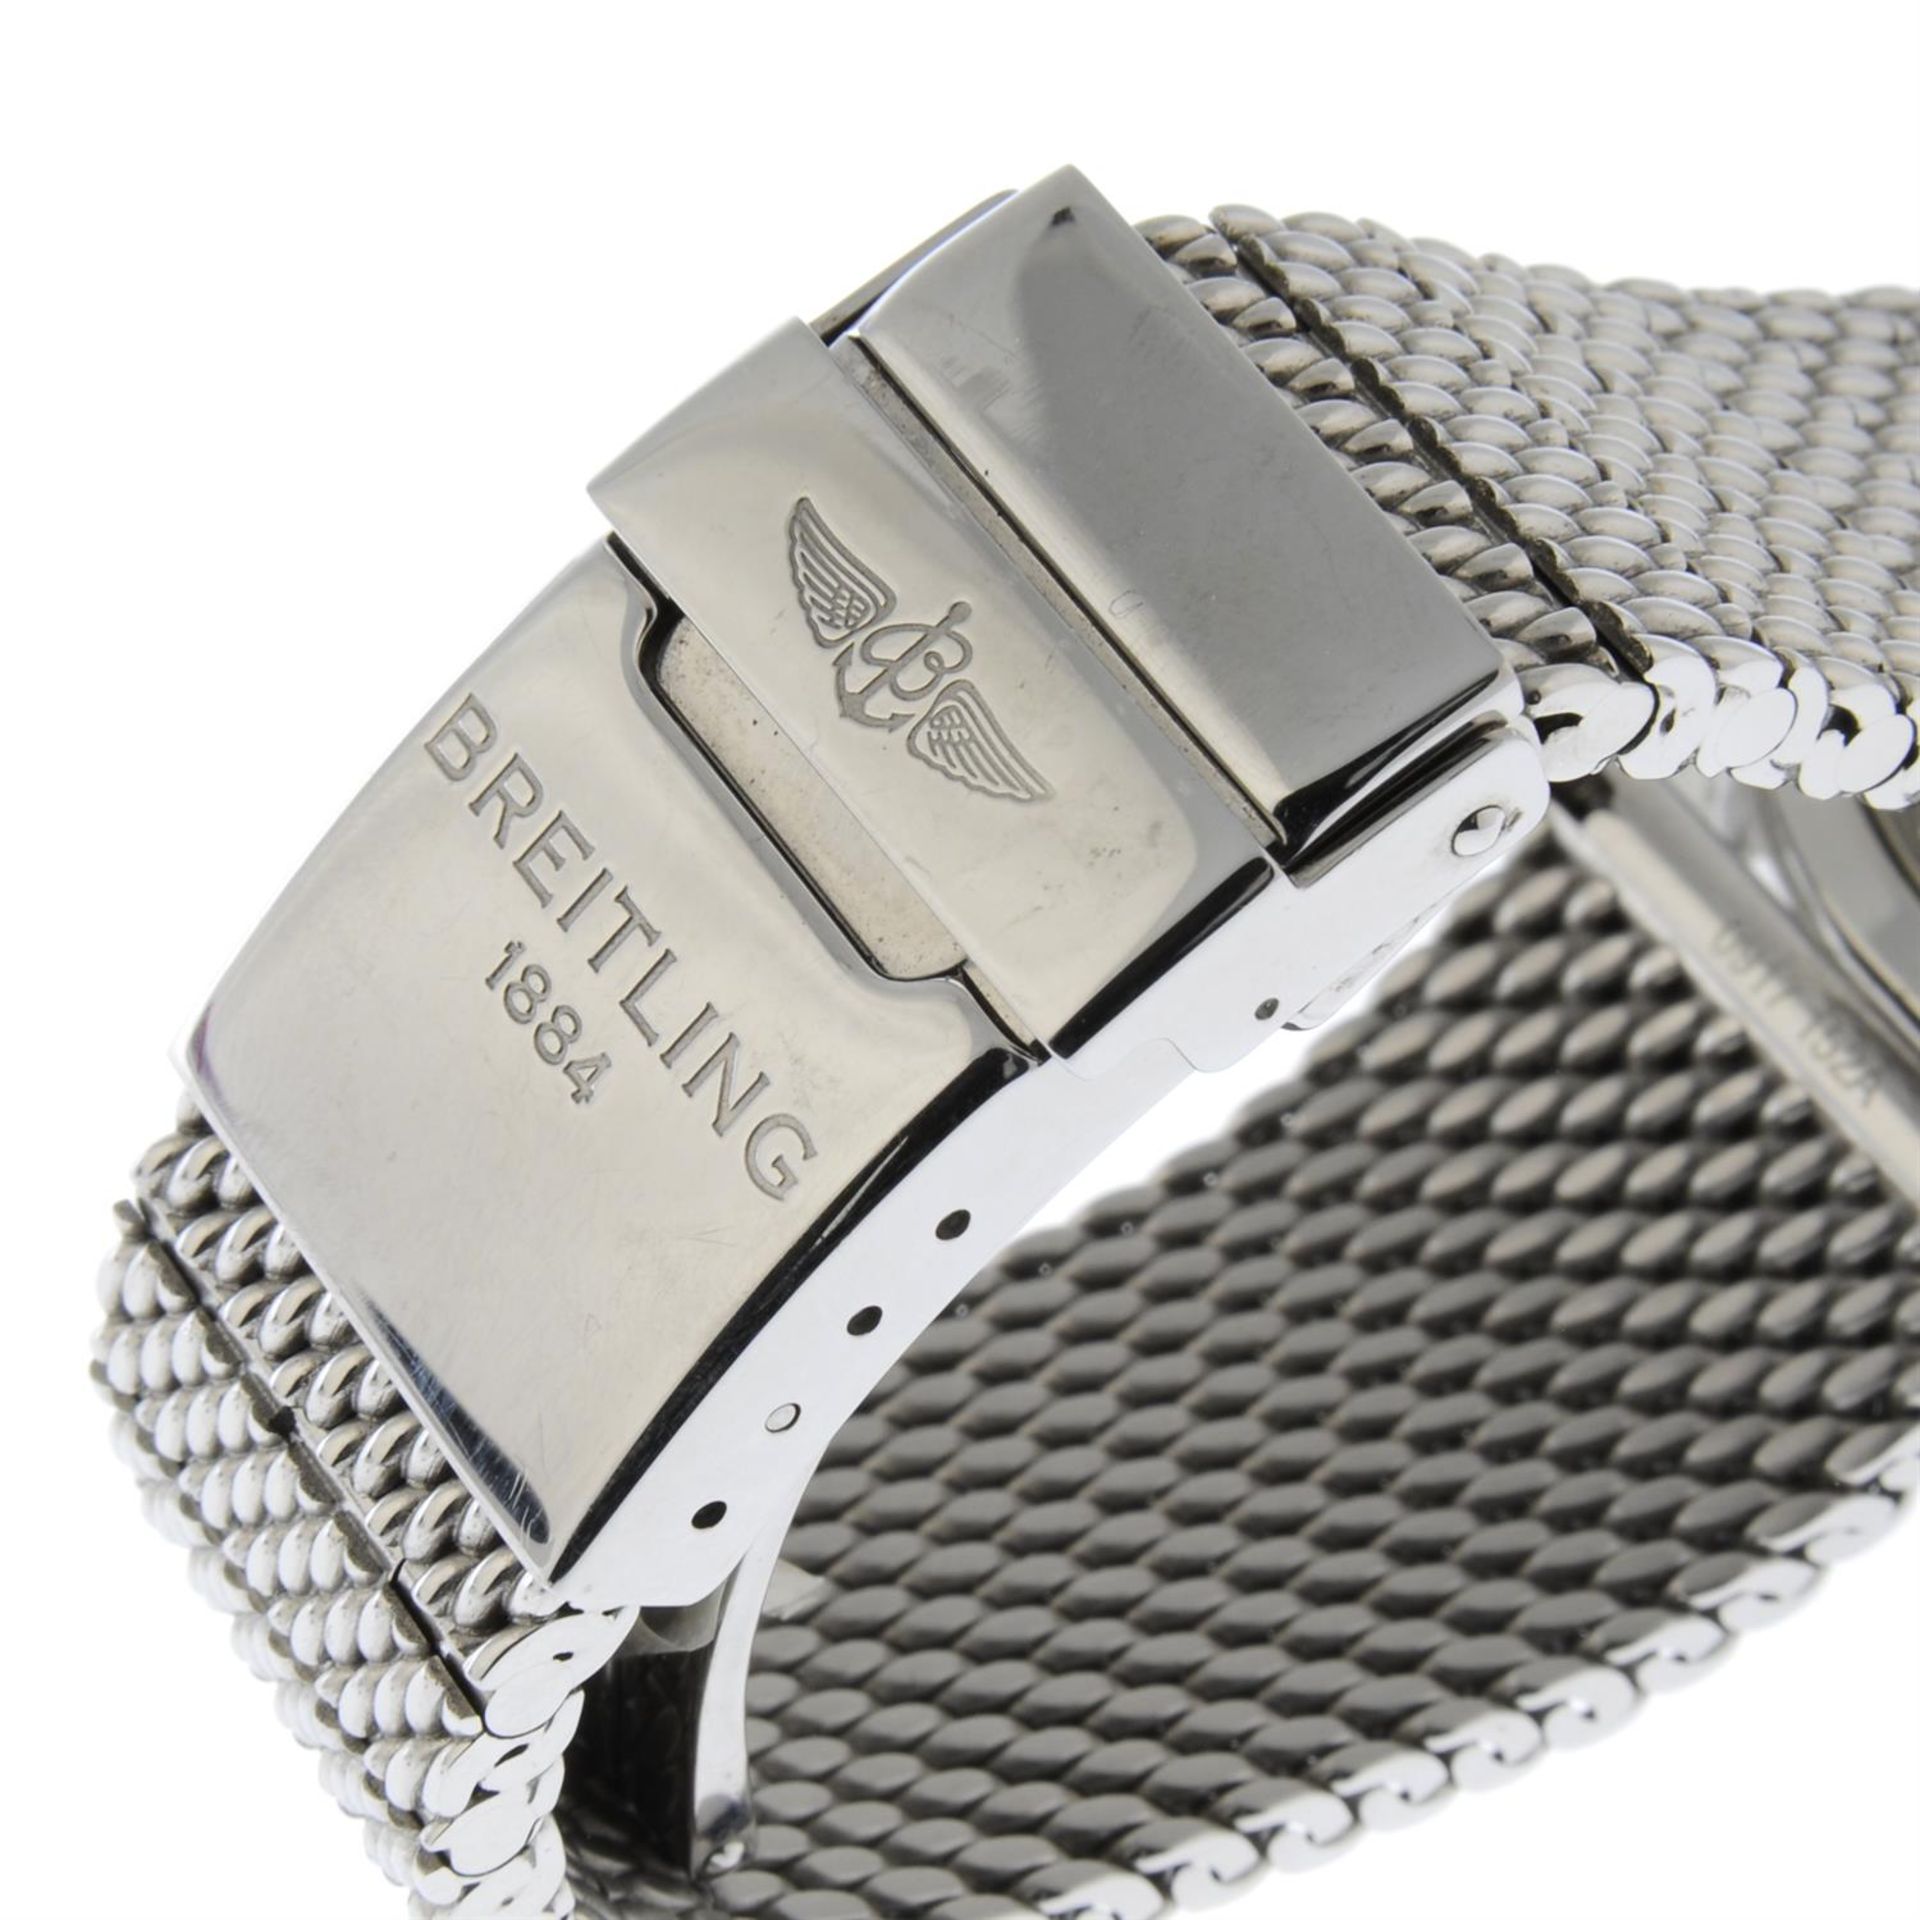 BREITLING - a stainless steel SuperOcean Heritage II Chronograph bracelet watch, 46mm. - Image 3 of 5